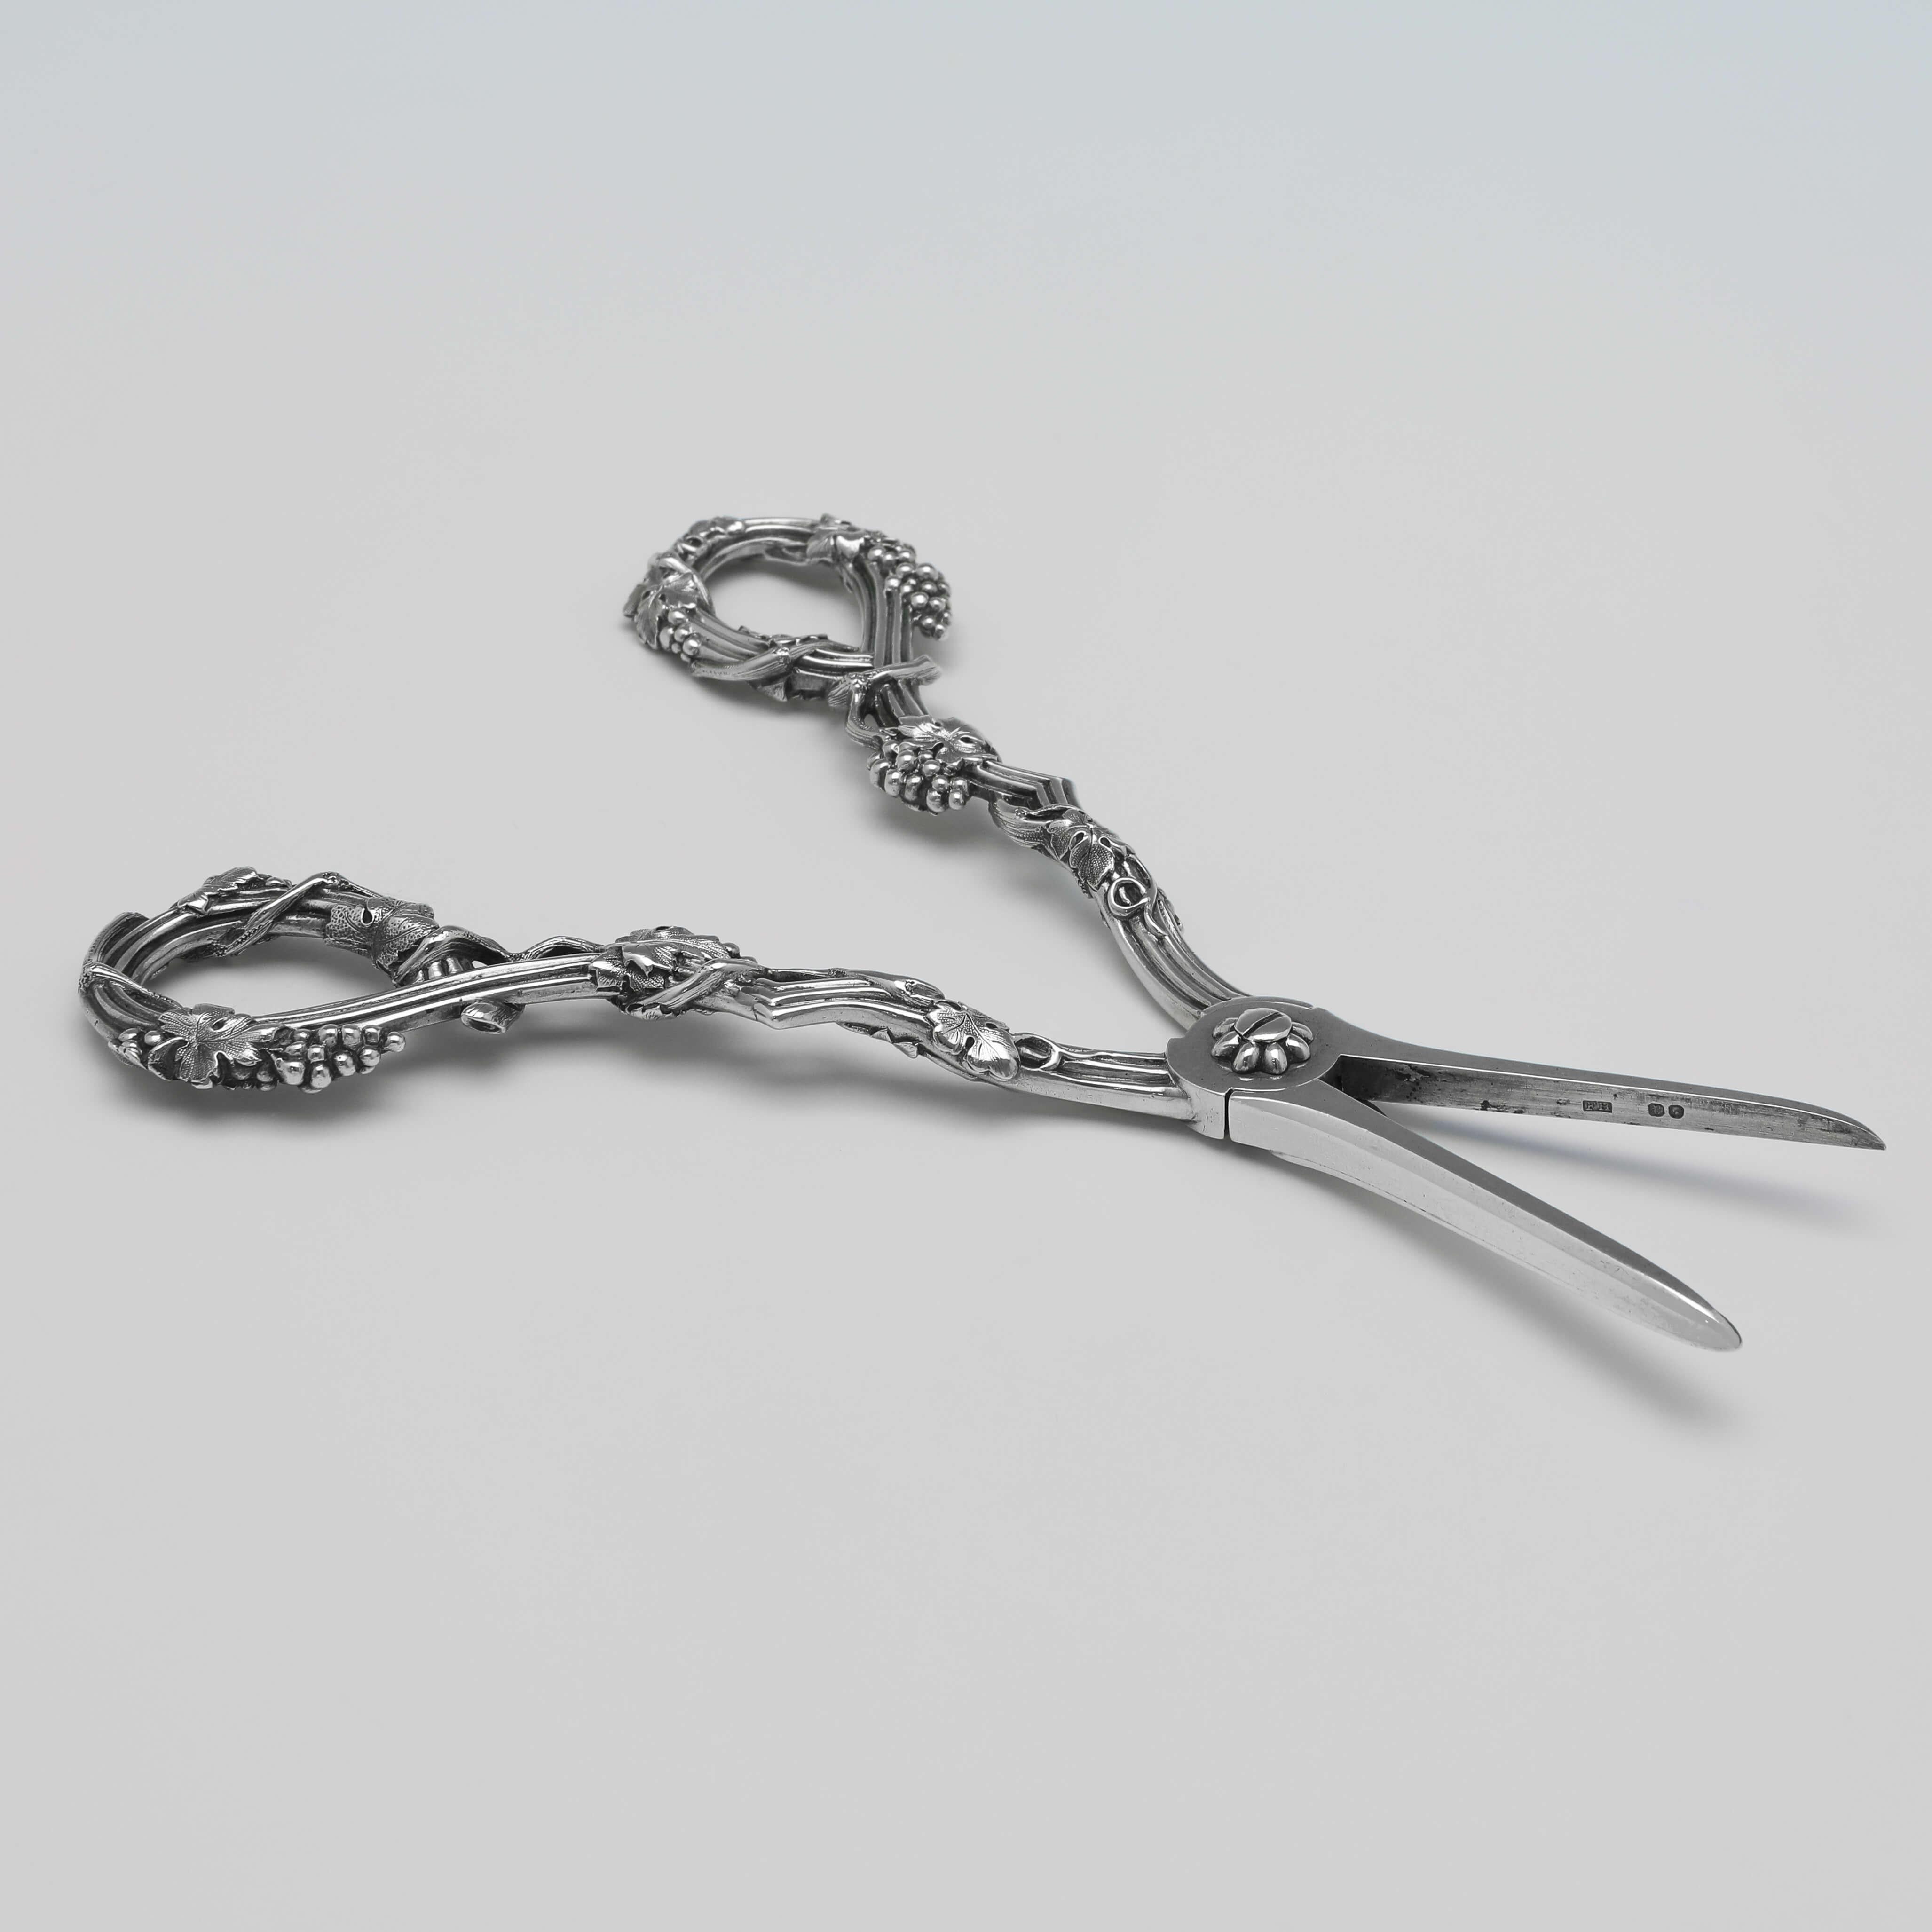 Hallmarked in London in 1850 by Francis Higgins, this attractive pair of Victorian, Antique Sterling Silver Grape Shears, feature grape and vine detailed handles.

The grape shears measure 7.25